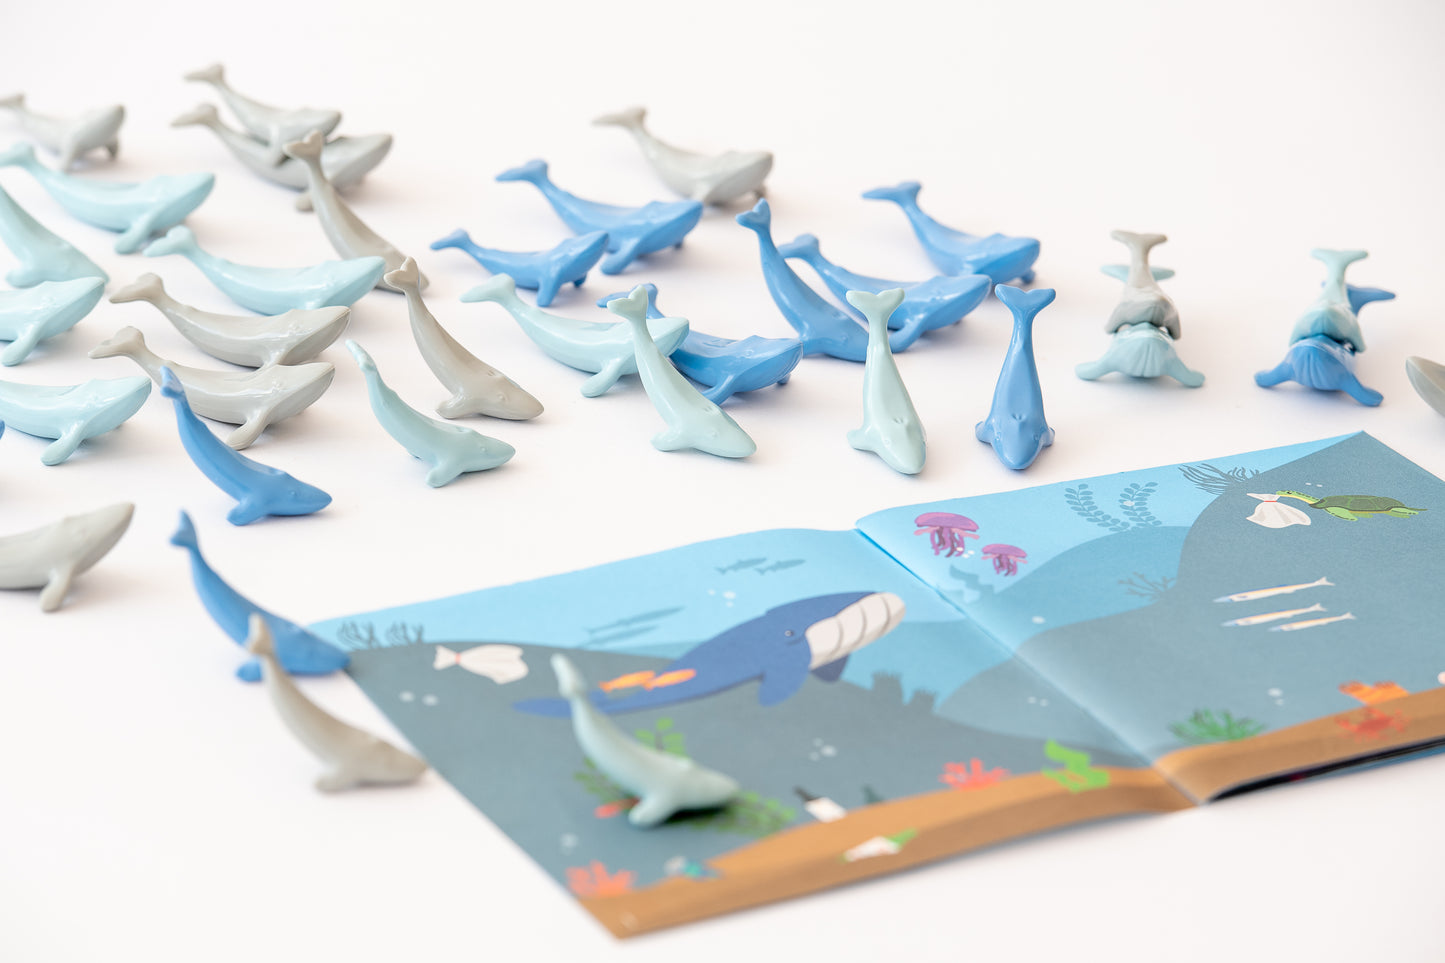 Introducing Sustainable Toys: The STEAM Whale Story Counter Set and Sustainable Play Book by Edx Education